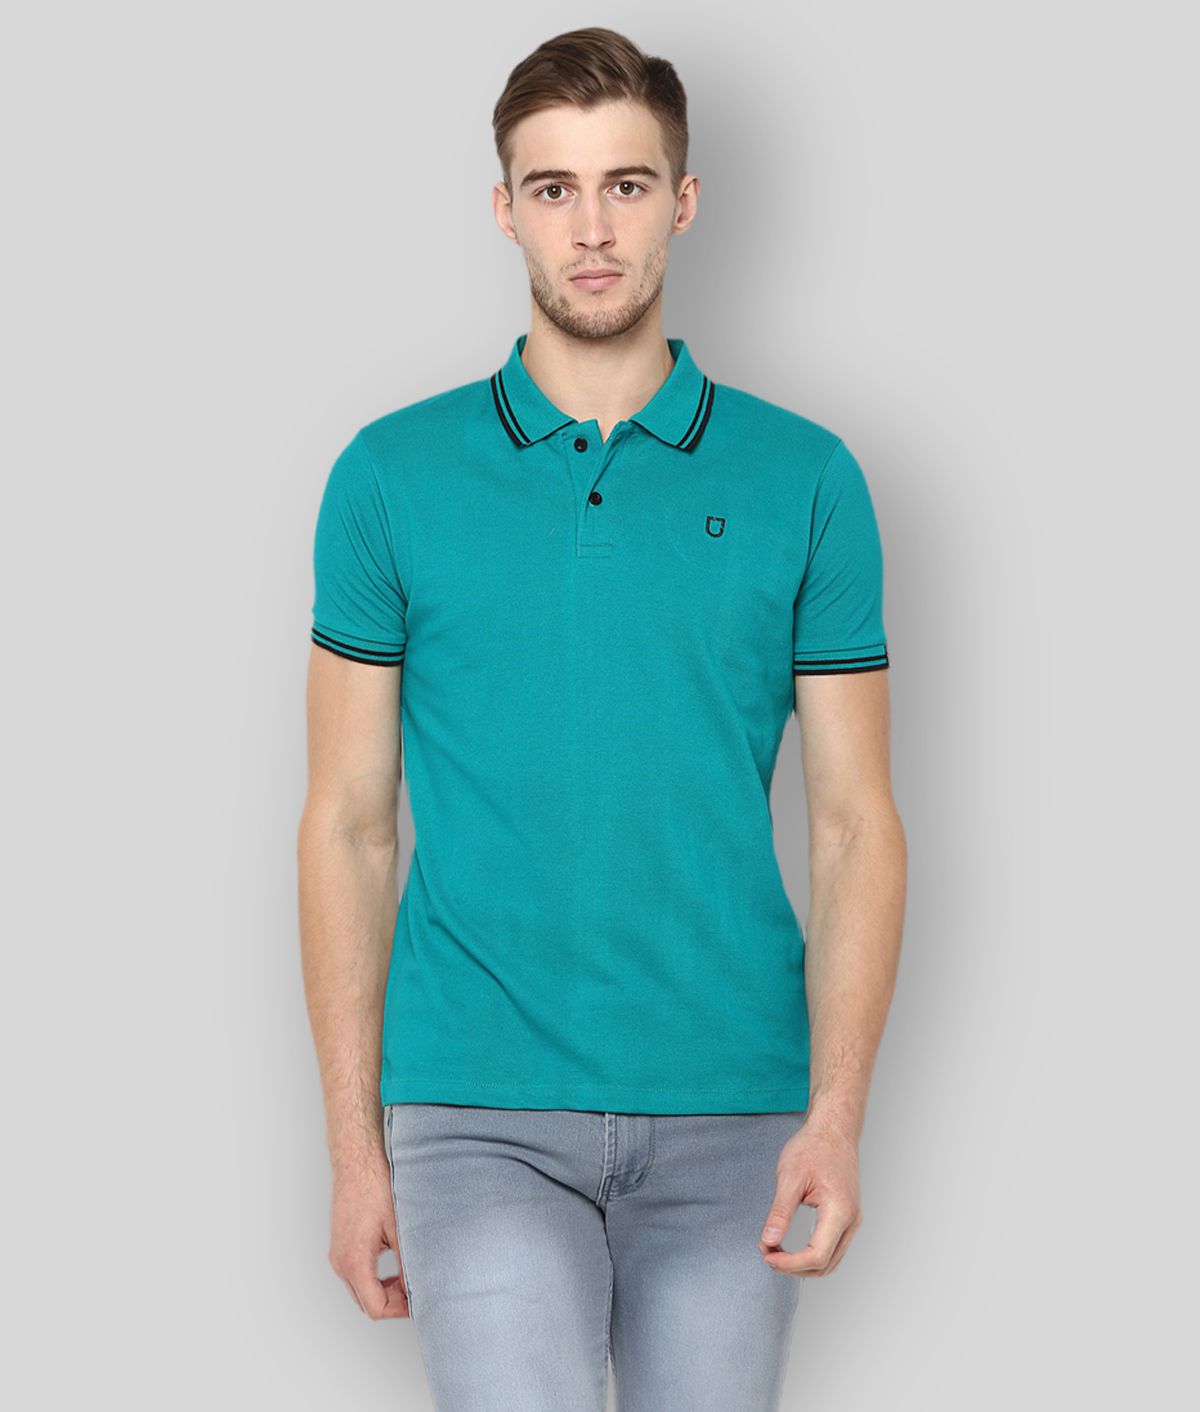 Urbano Fashion - Green Cotton Blend Slim Fit Men's Polo T Shirt ( Pack of 1 )